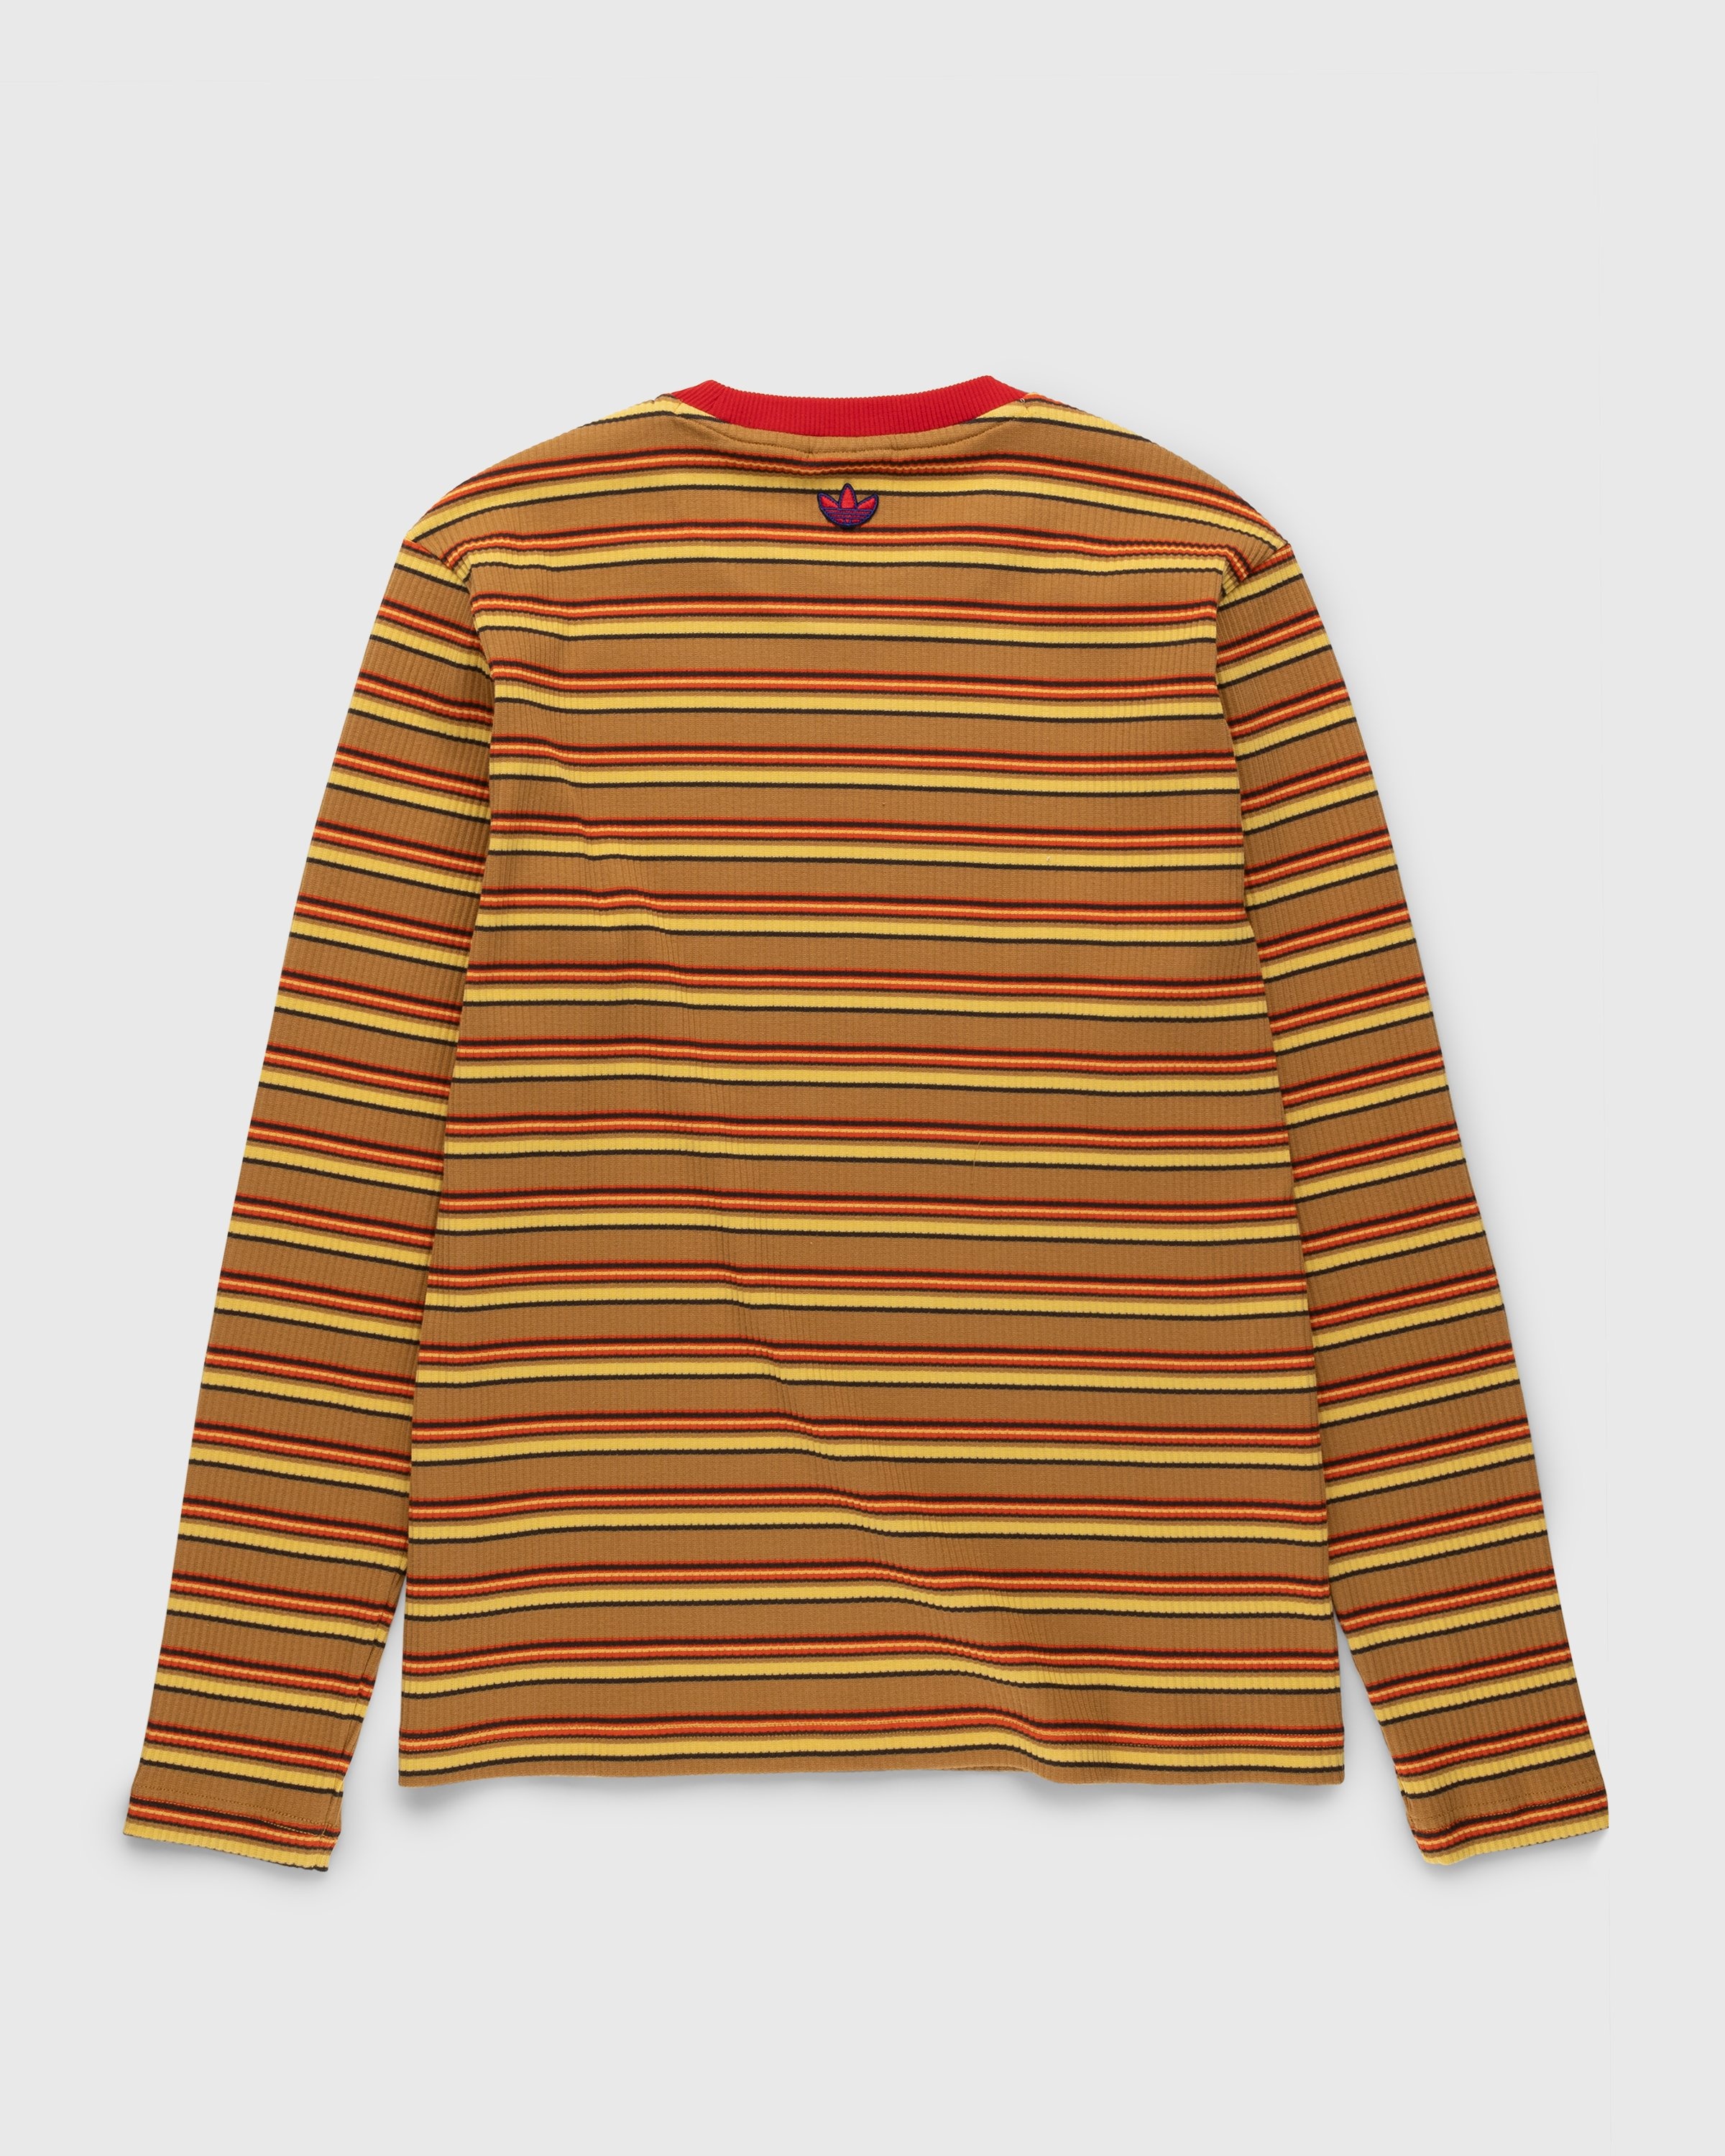 Adidas x Wales Bonner – WB Striped Longsleeve St Fade Gold/Scarlet - Longsleeves - Red - Image 2